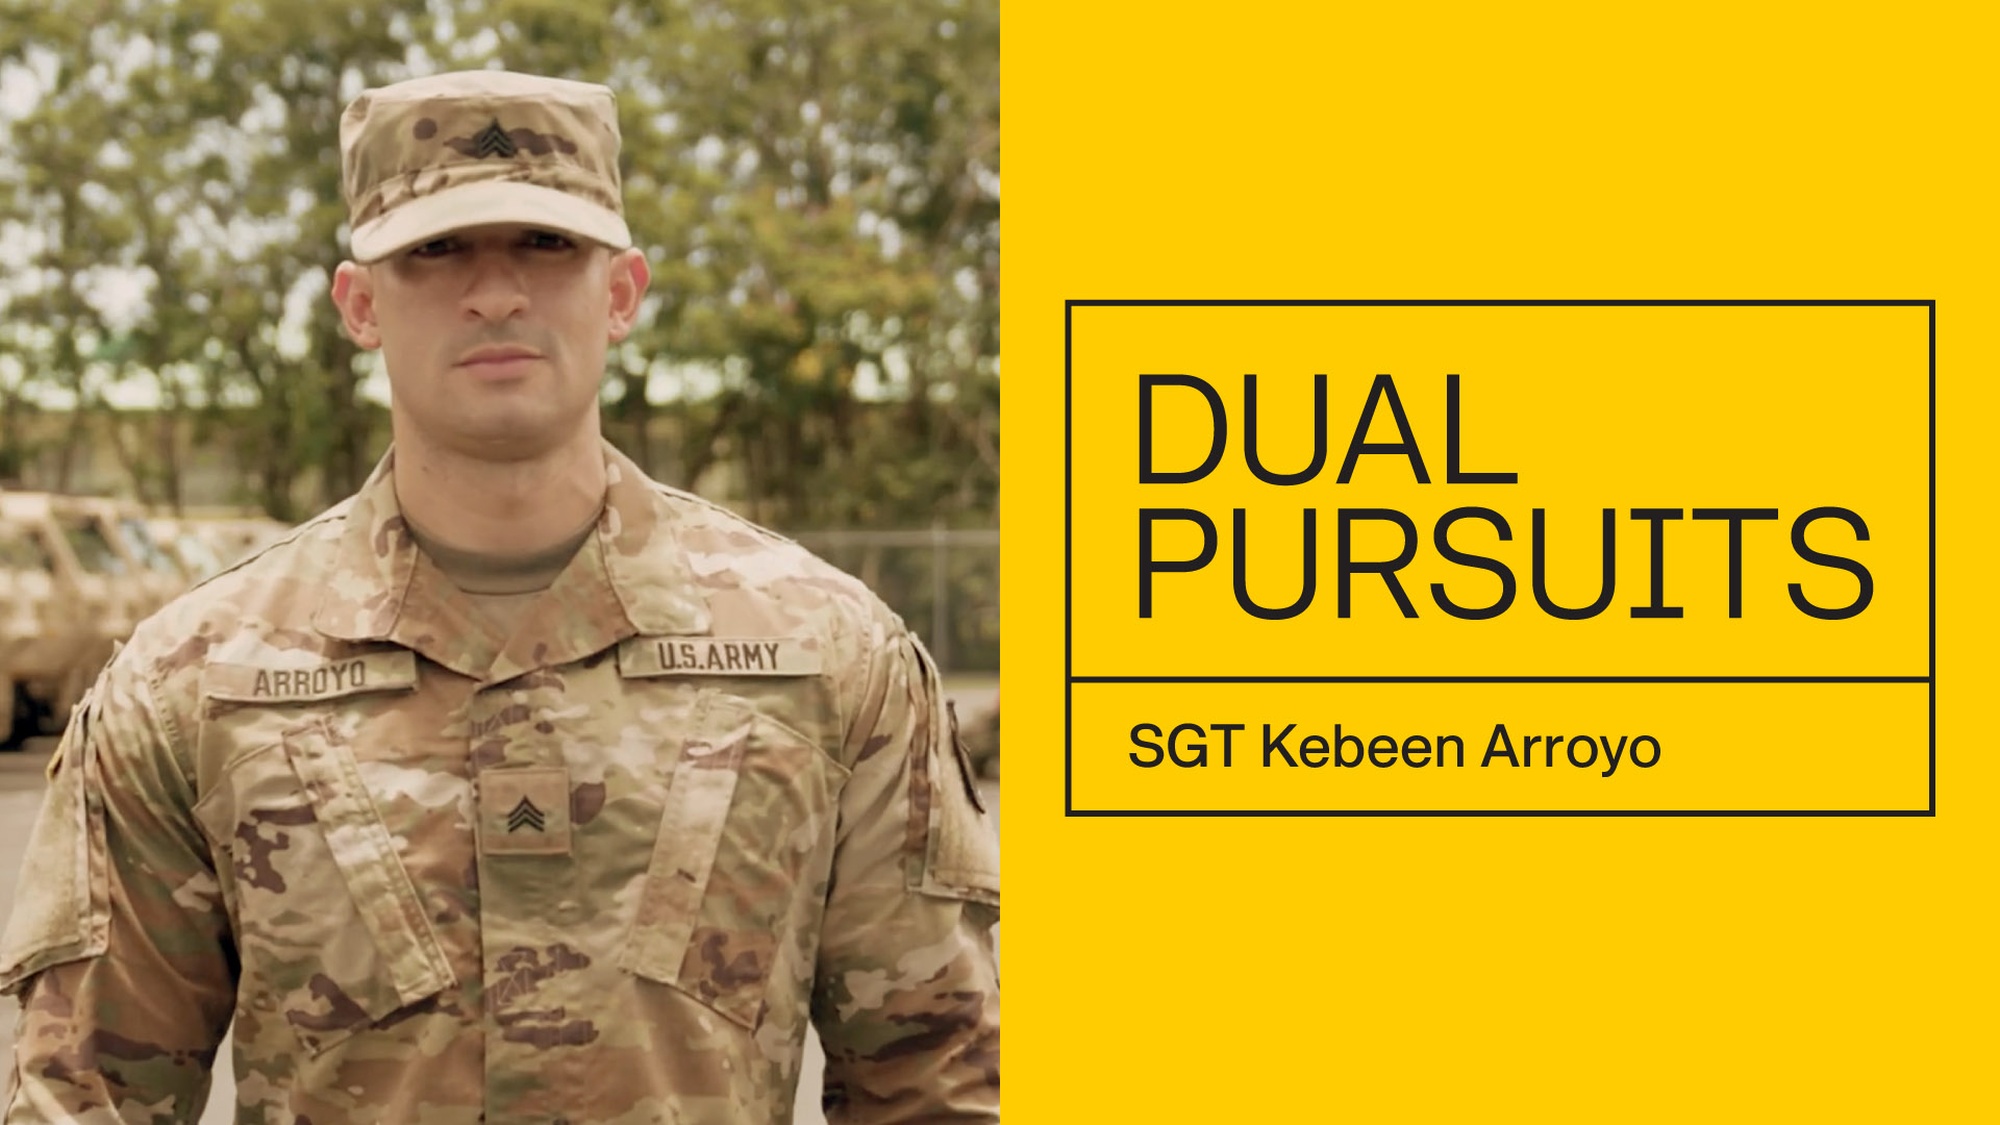 SGT Kebeen Arroyo shares his story of dual pursuits in the Army Reserve